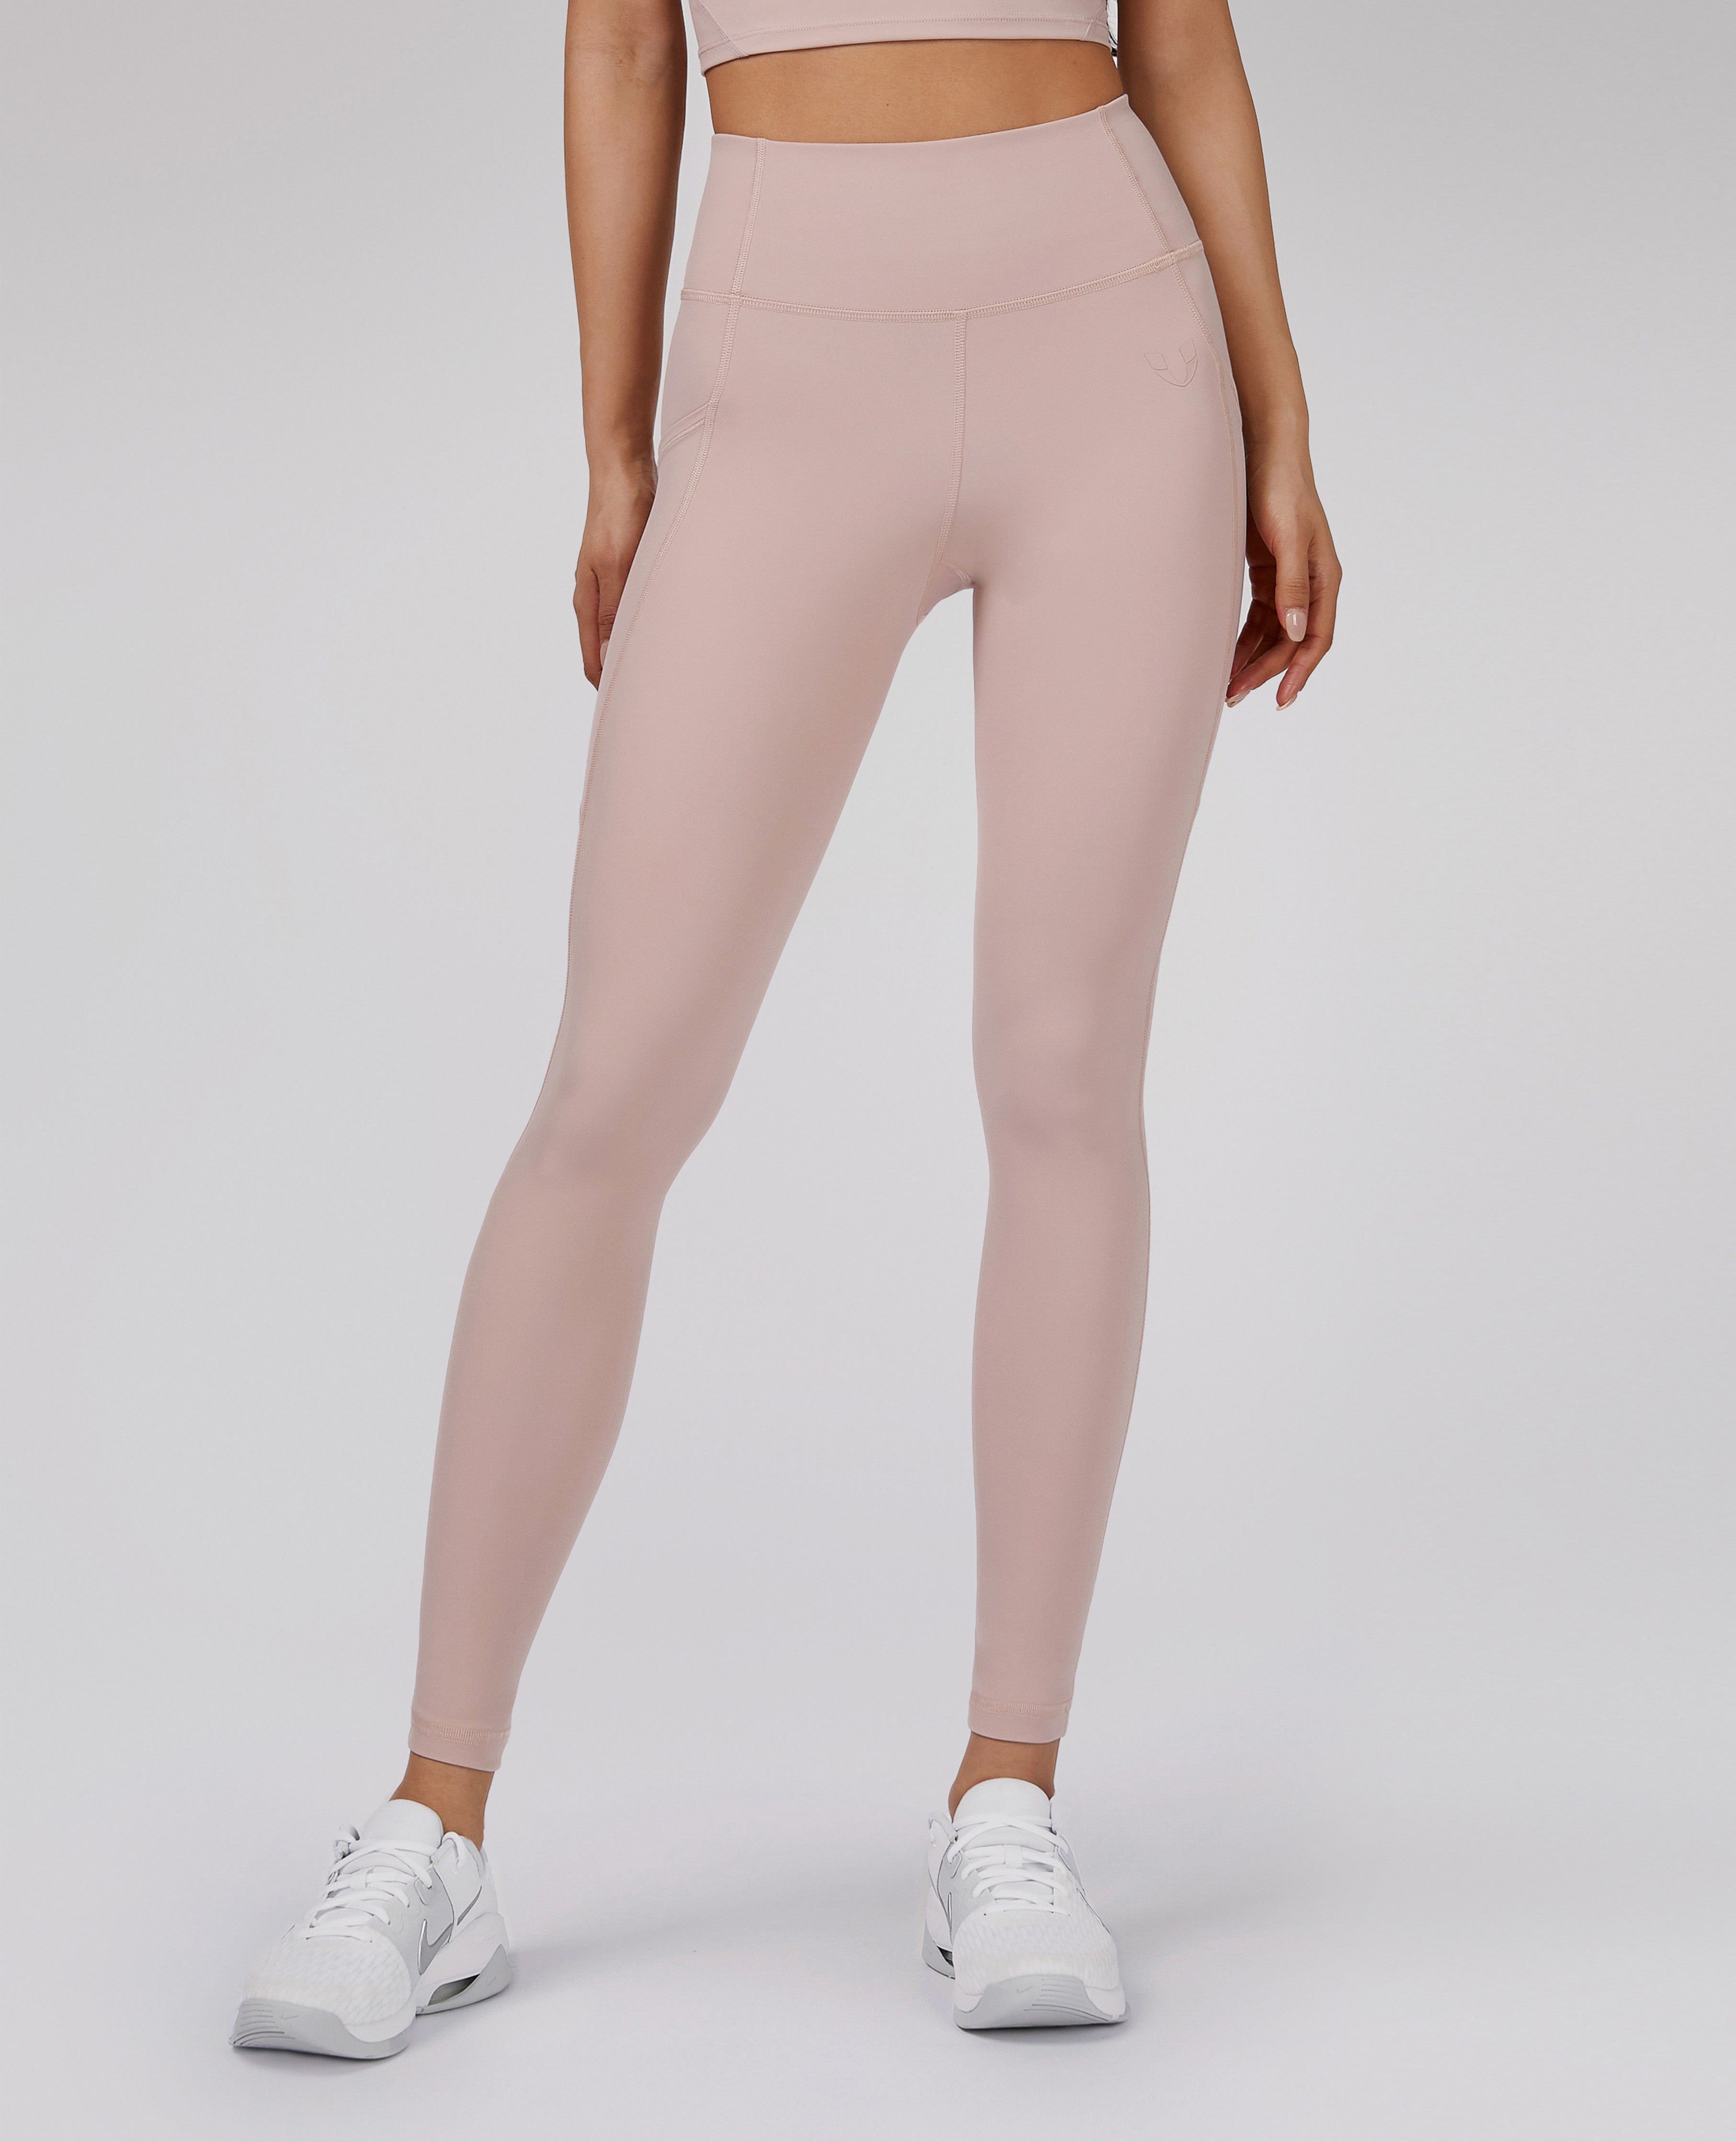 Plus size leggings - Pale Pink | isifiso